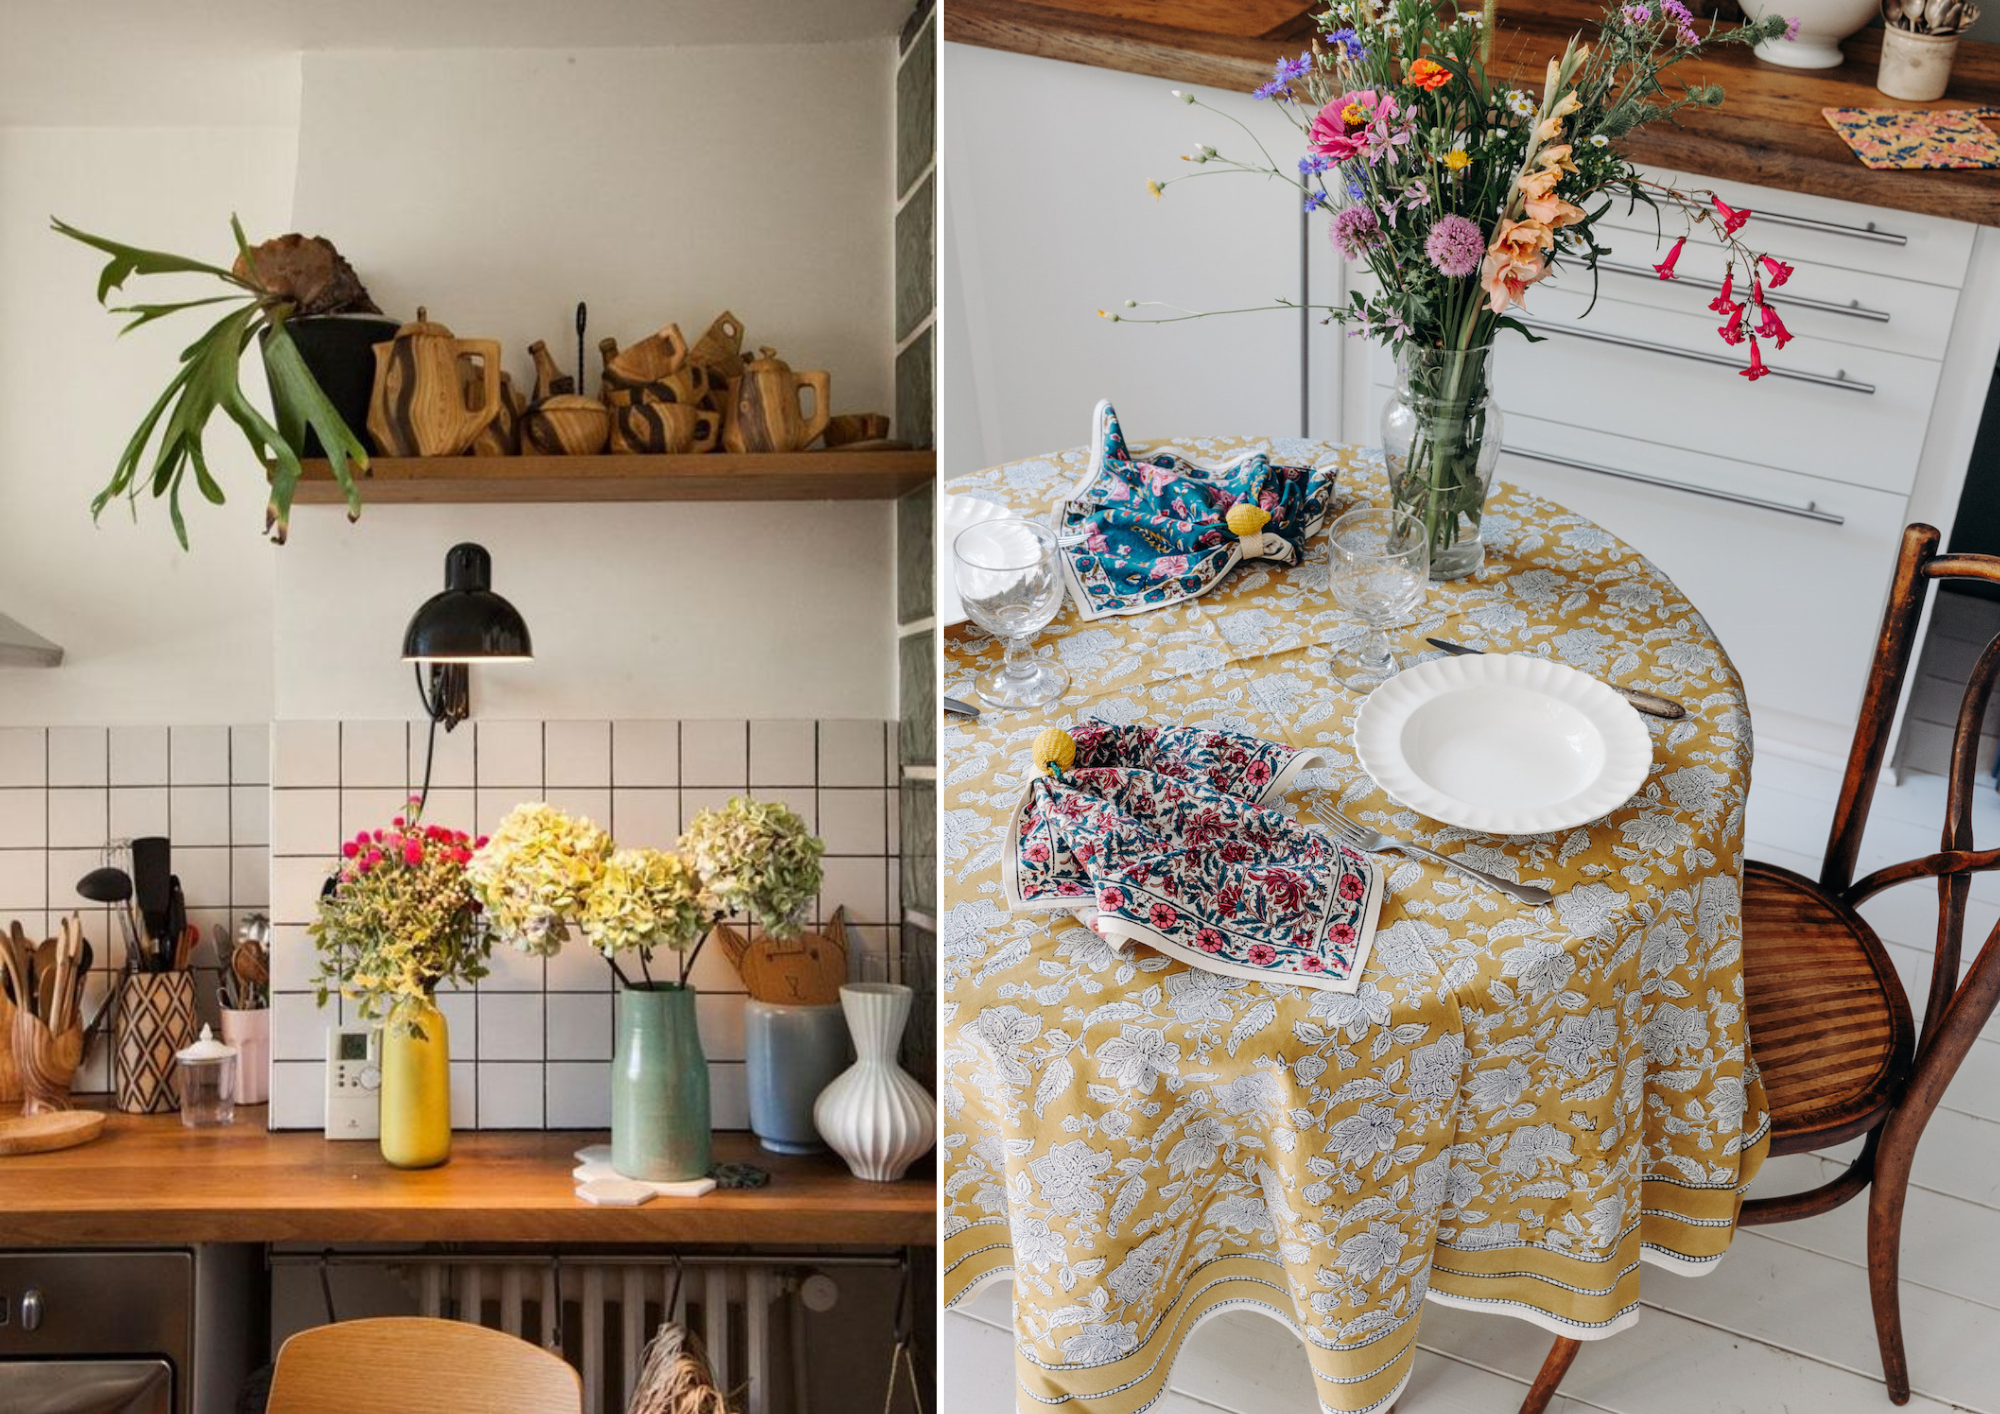 Flowers in the kitchen, Rang round printed tablecloth